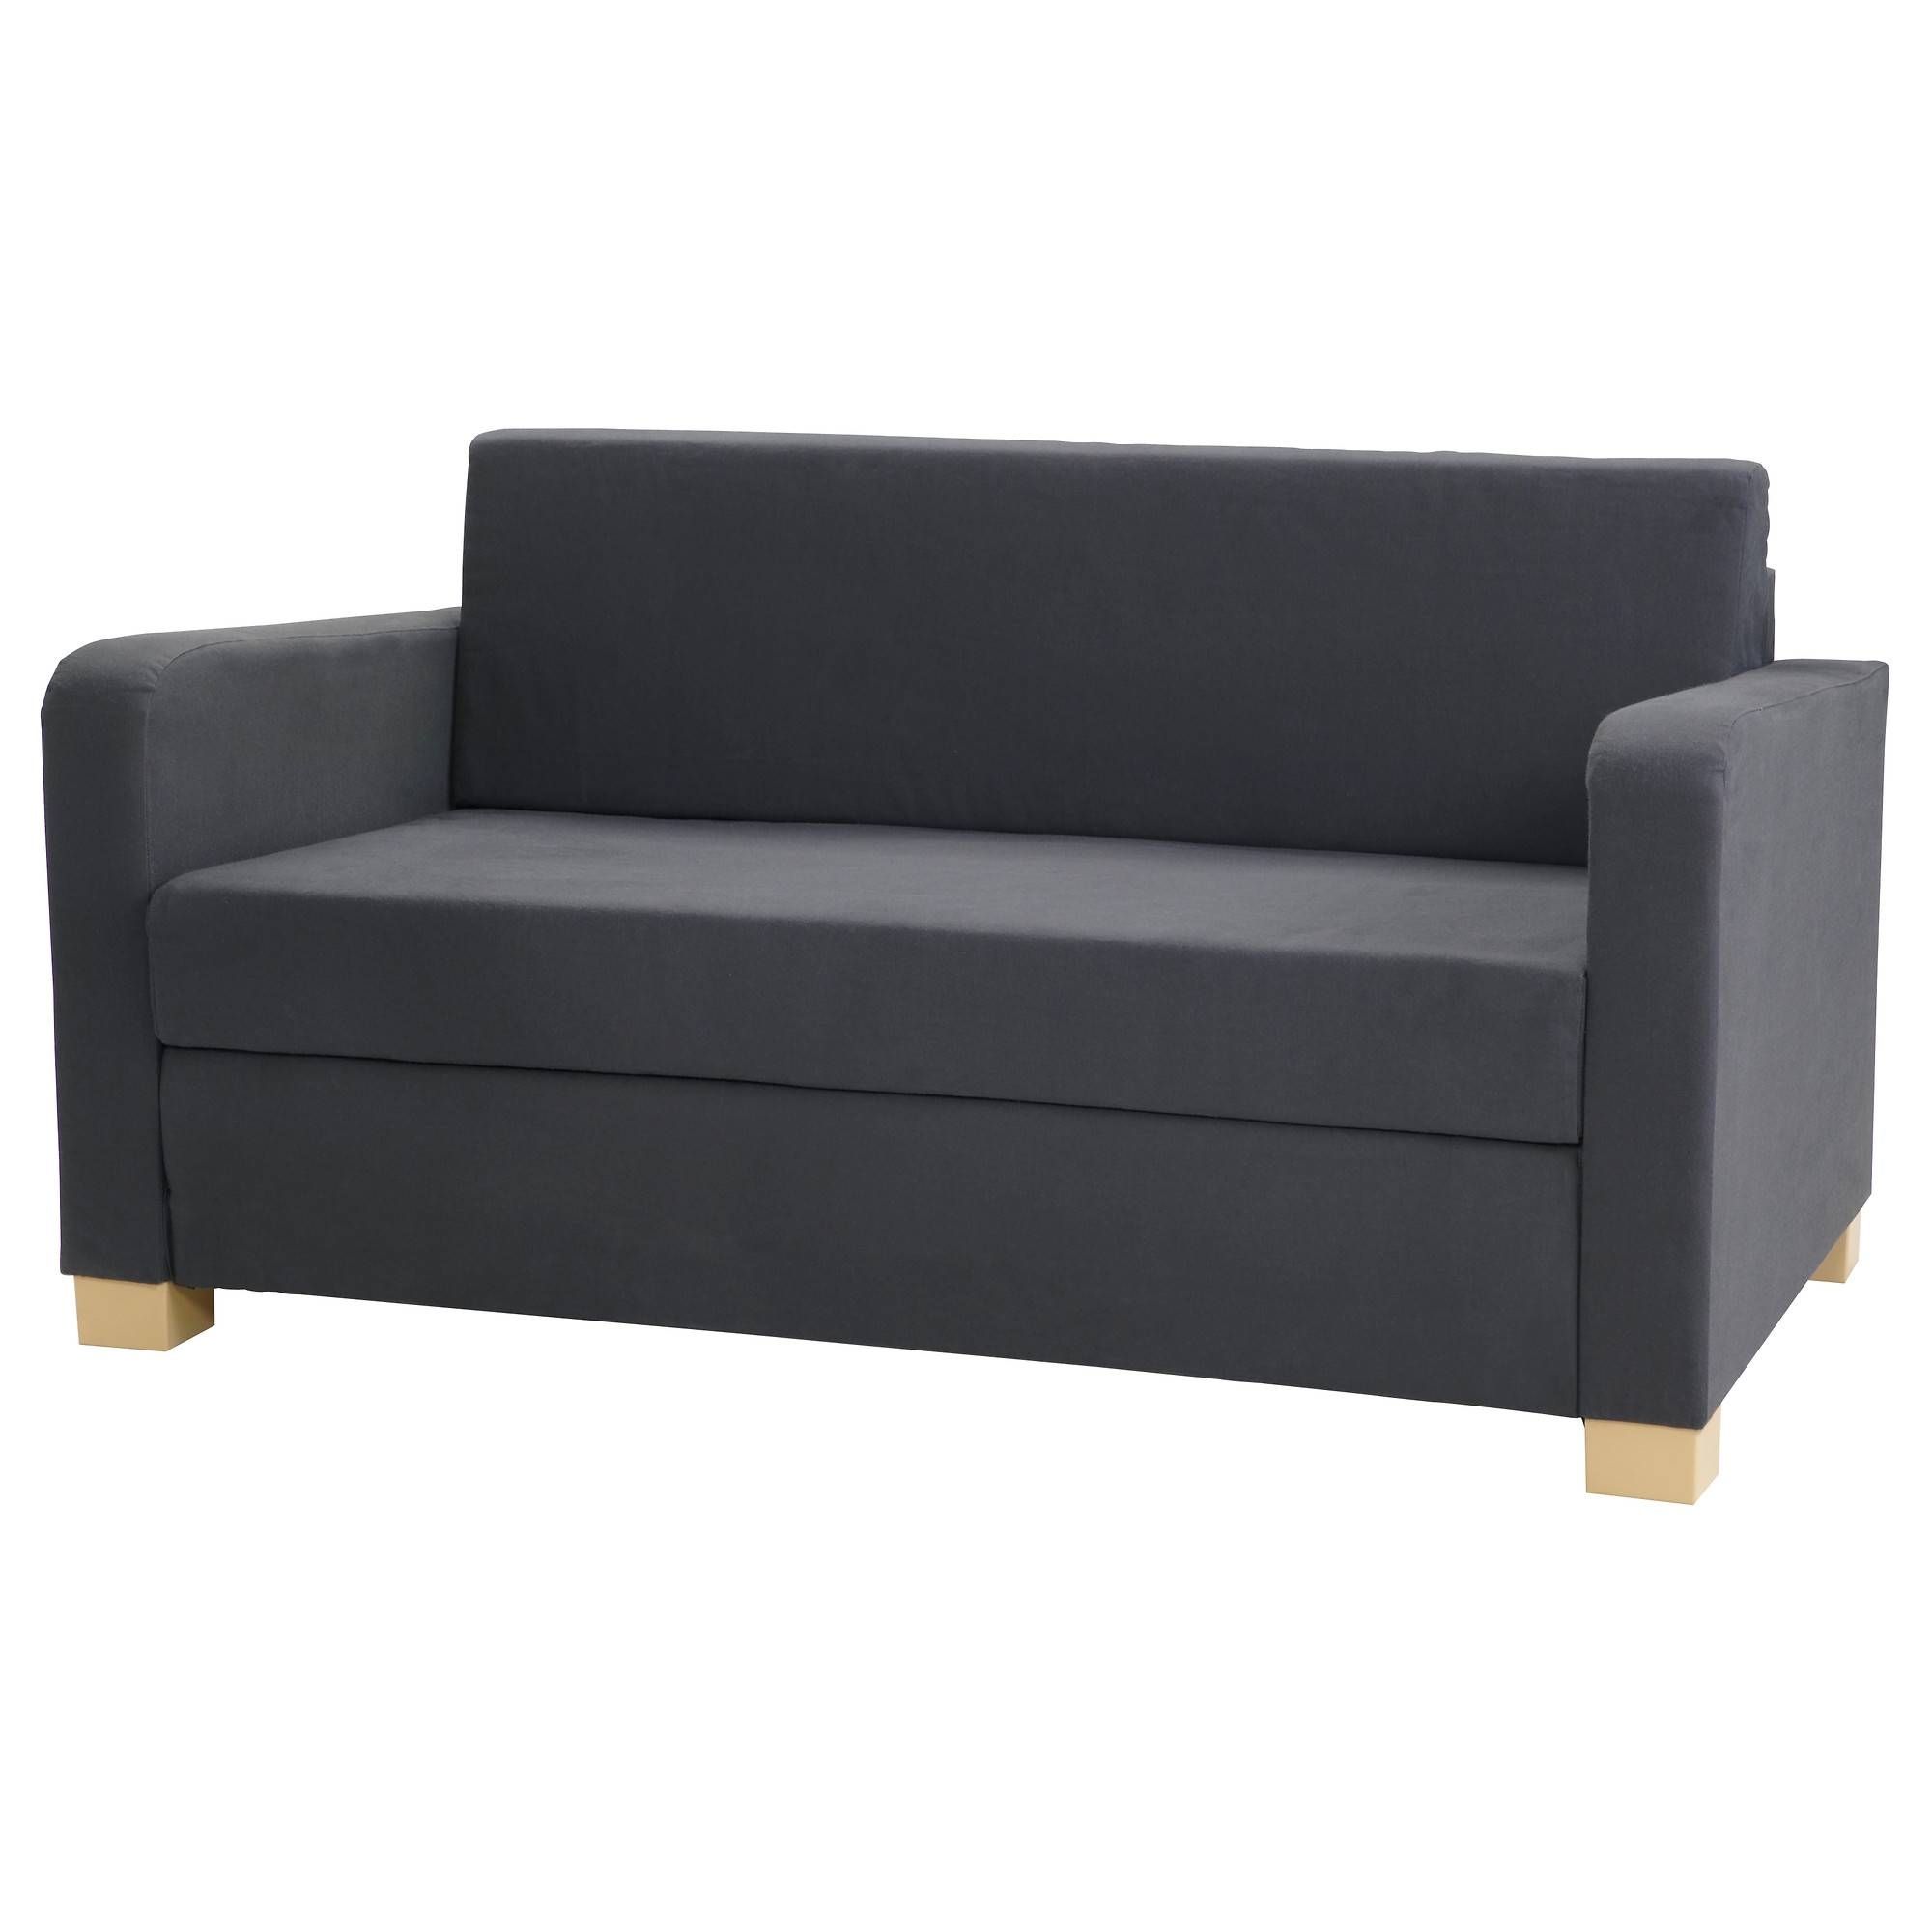 Sleeper Sofas & Chair Beds – Ikea Intended For Small Scale Sofa Bed (View 20 of 25)